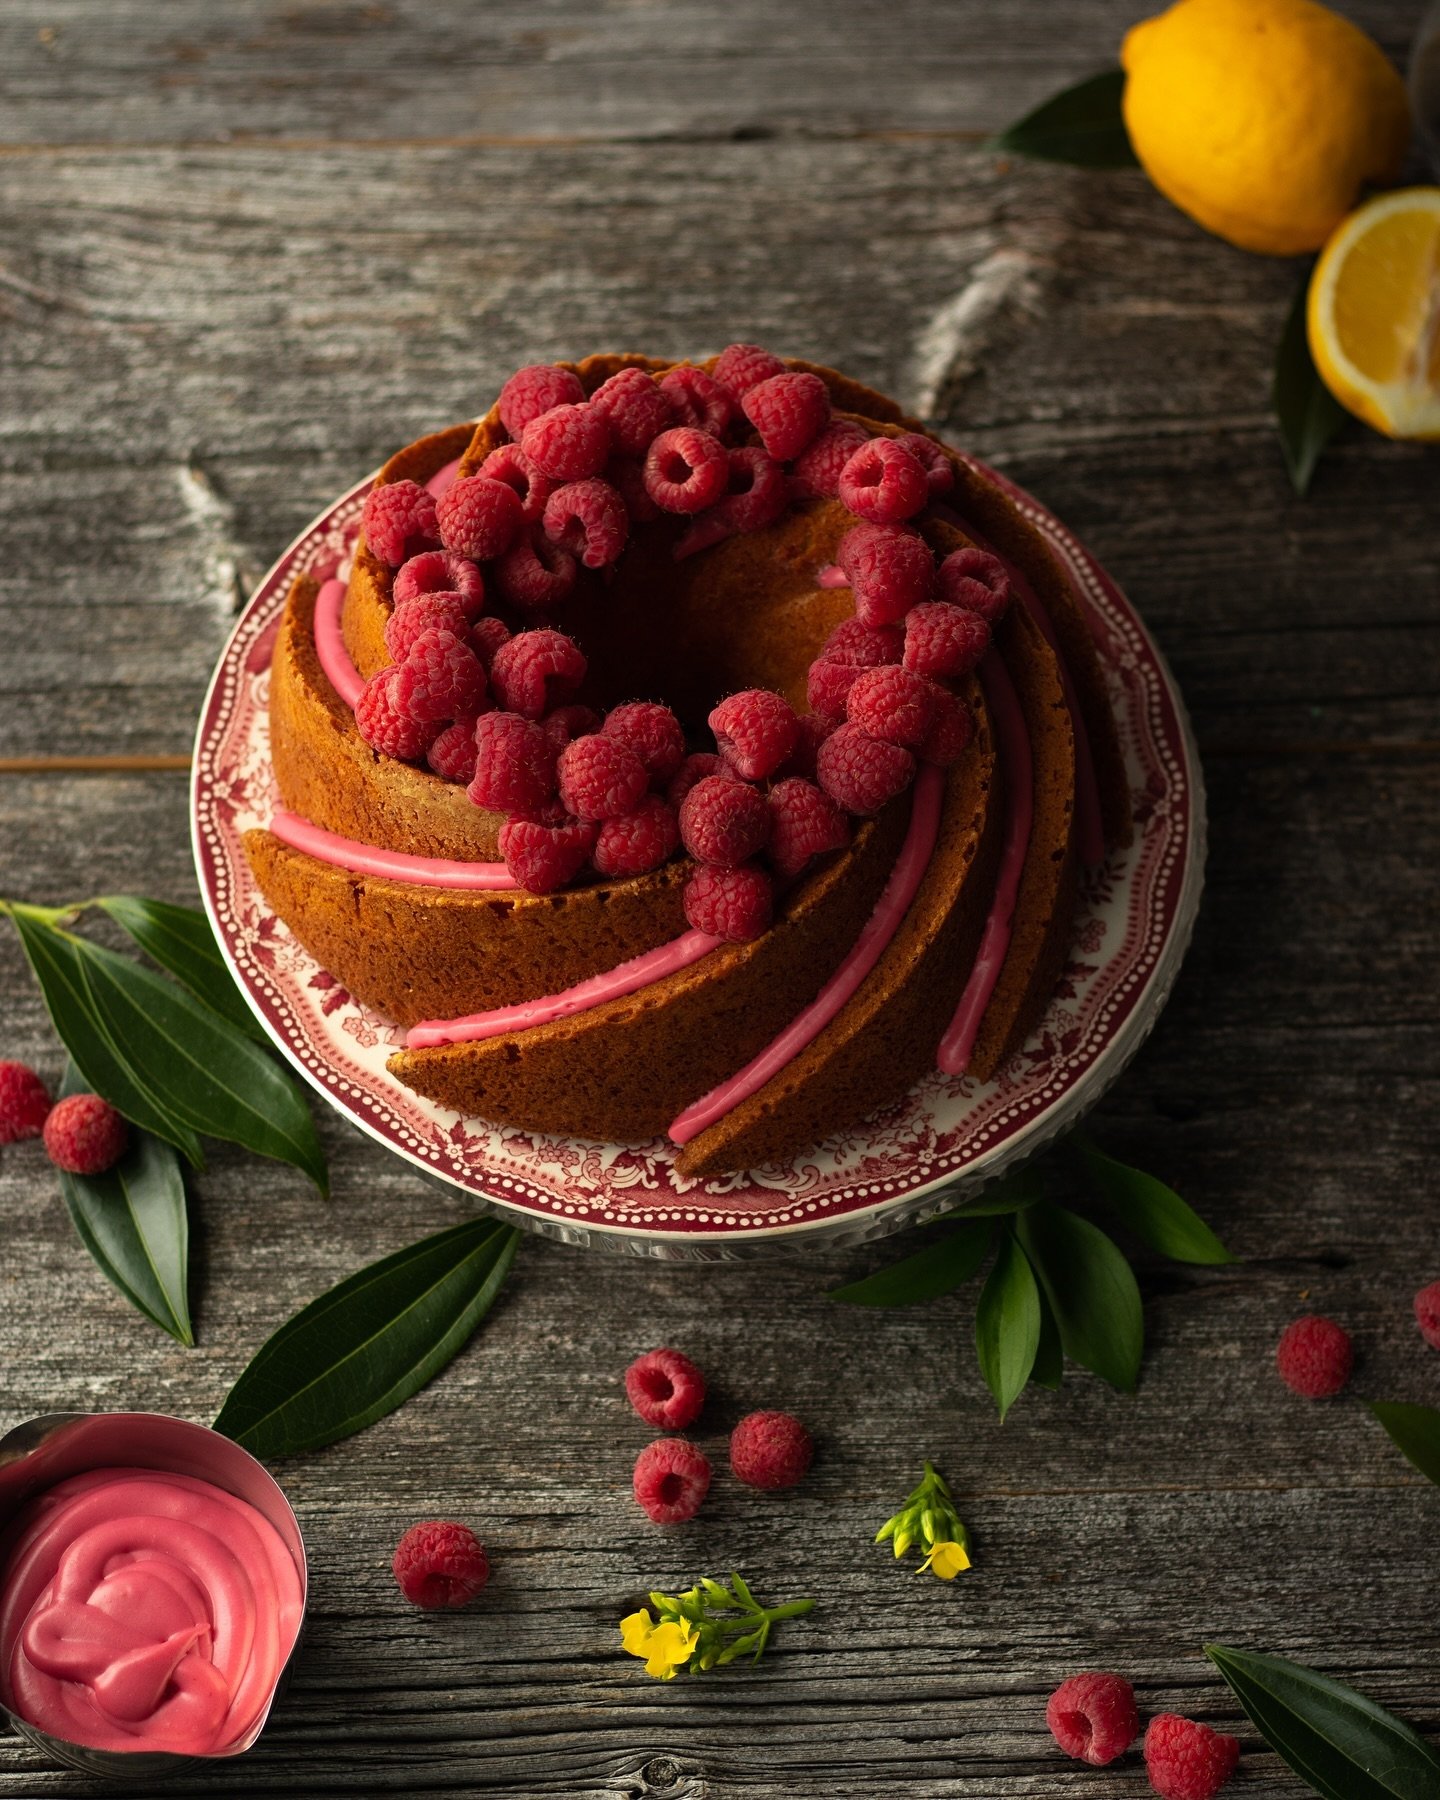 ☀️Happy Friday! Looking for a weekend baking project? 🙌🏻

With the fresh, vibrant flavours of lemon and raspberry, you&rsquo;ll taste Spring in every bite of this Lemon-Raspberry Bundt Cake!  A family-favourite around these parts! 🍋🙌🏻

Recipe is